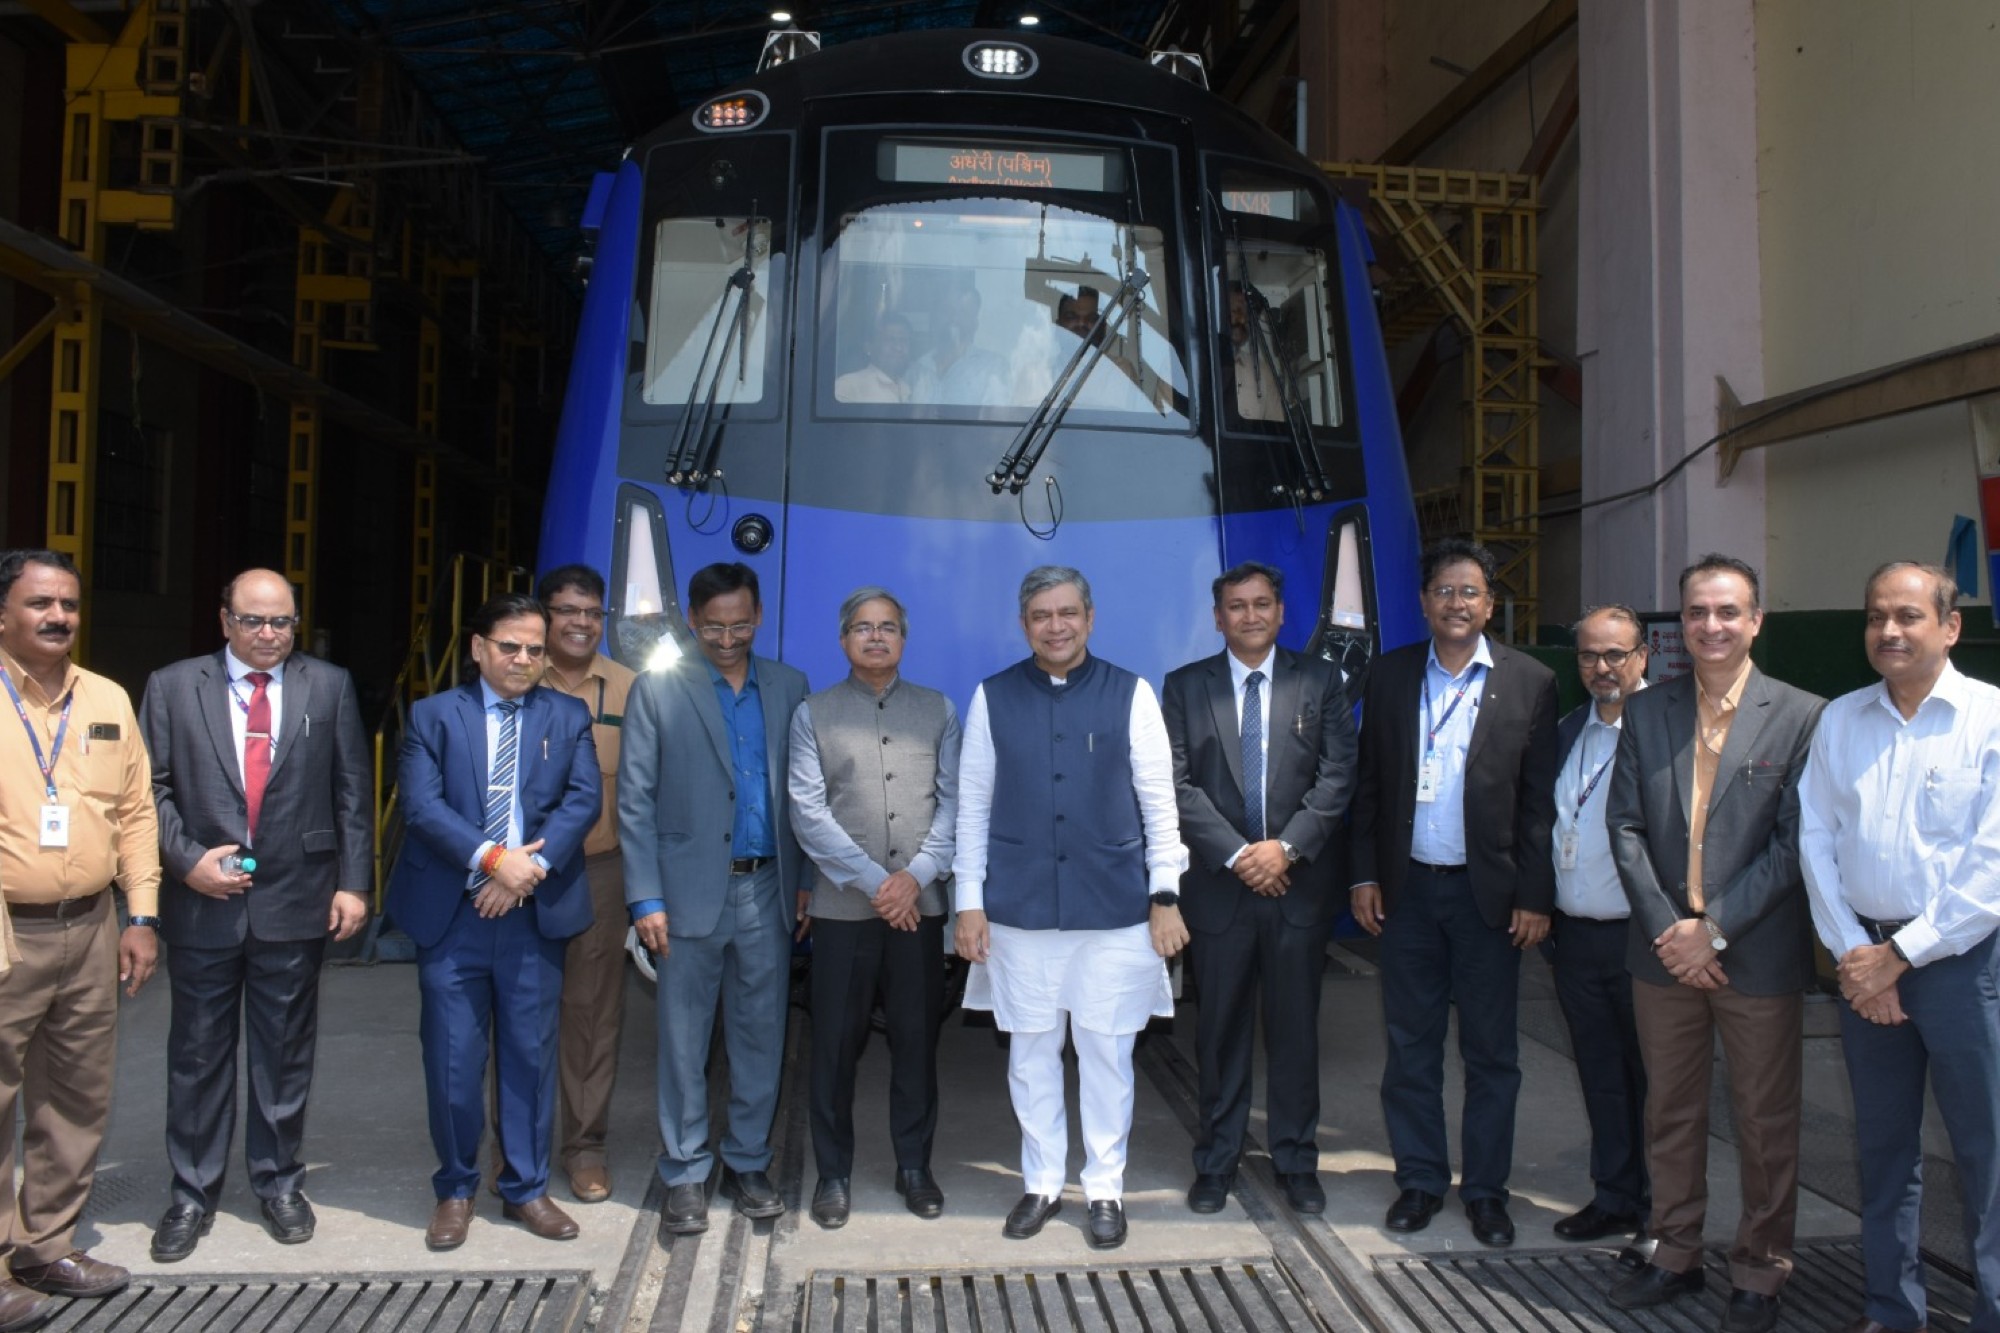 The Hon’ble Union Minister for Railways, Shri Ashwini Vaishnaw, marked a historic moment as he inaugurated the carbody structure of India’s pioneering Vande Bharat Sleeper trainset, proudly manufactured by BEML Ltd at its Bangalore-based rail unit.